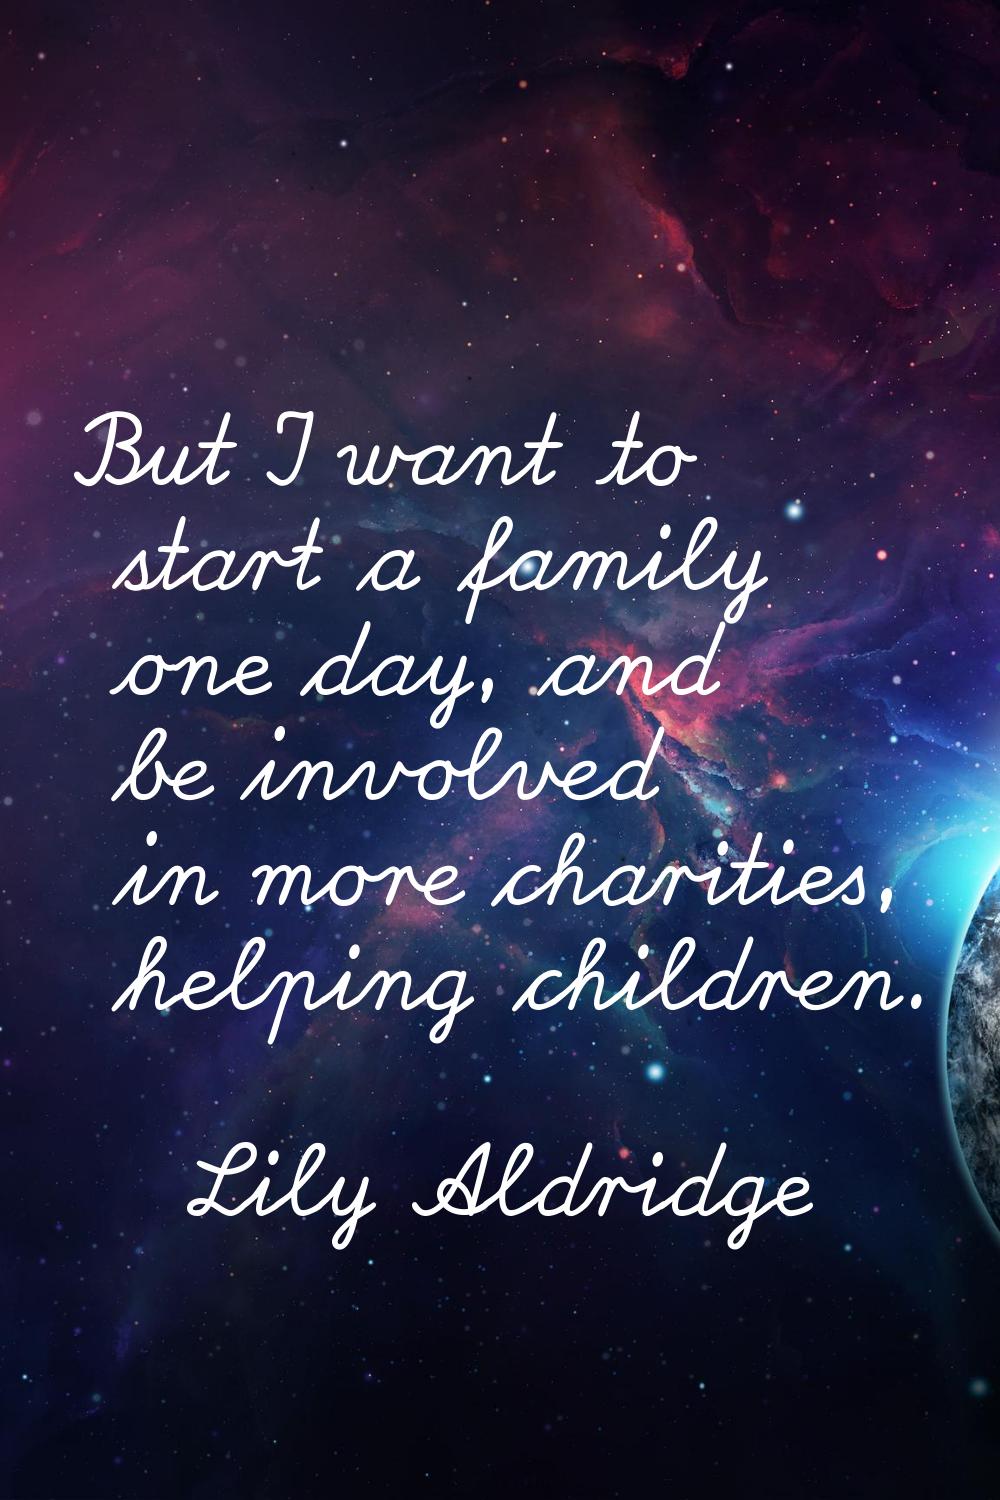 But I want to start a family one day, and be involved in more charities, helping children.